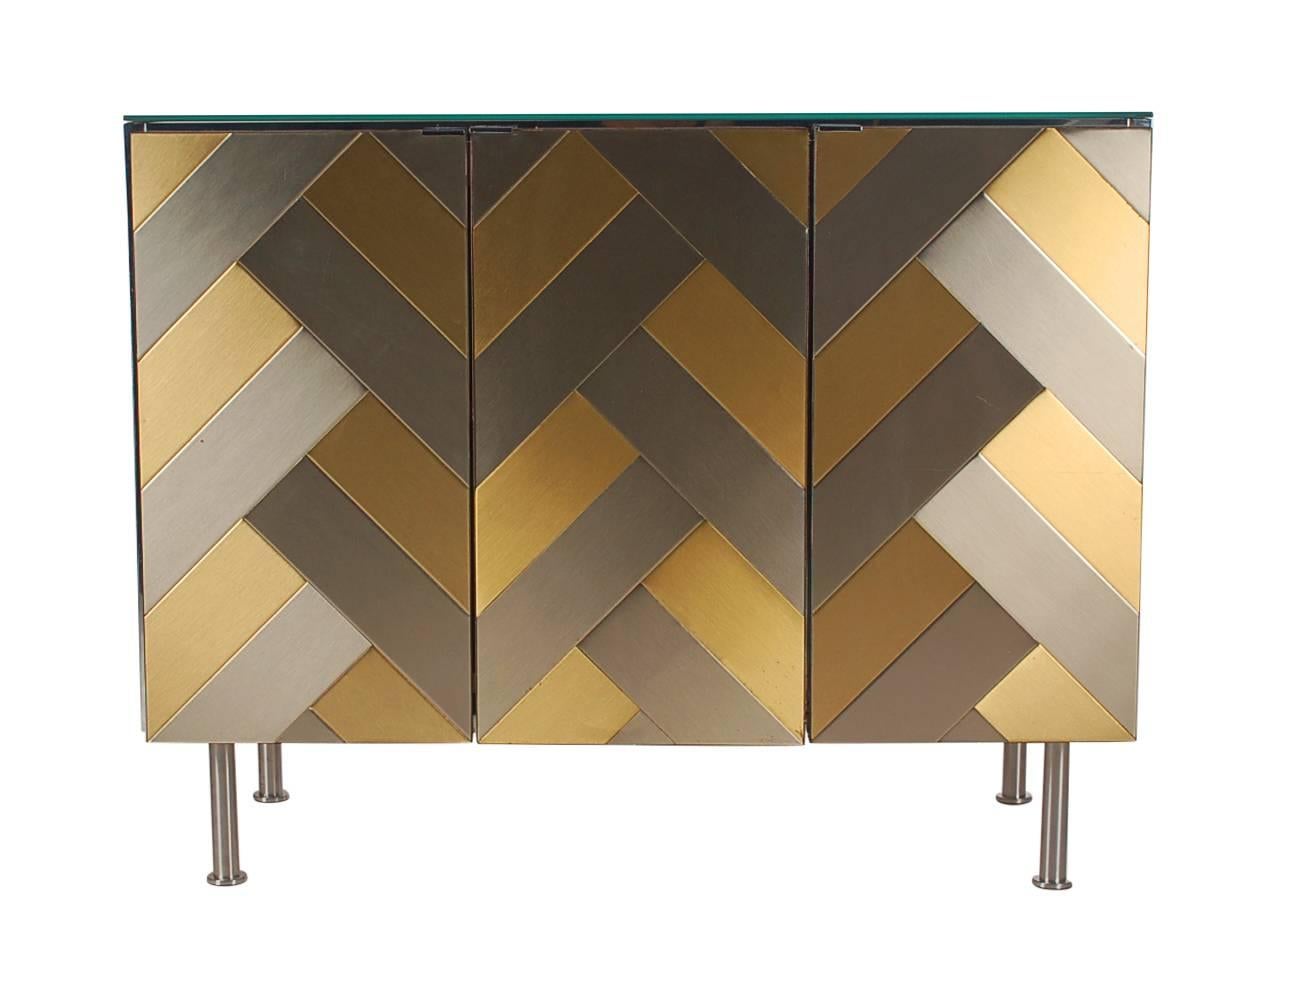 A beautiful interior lit bar cabinet by Ello Furniture Company. It features a brass and steel herringbone front, mirrored top and lighted white laminate interior.